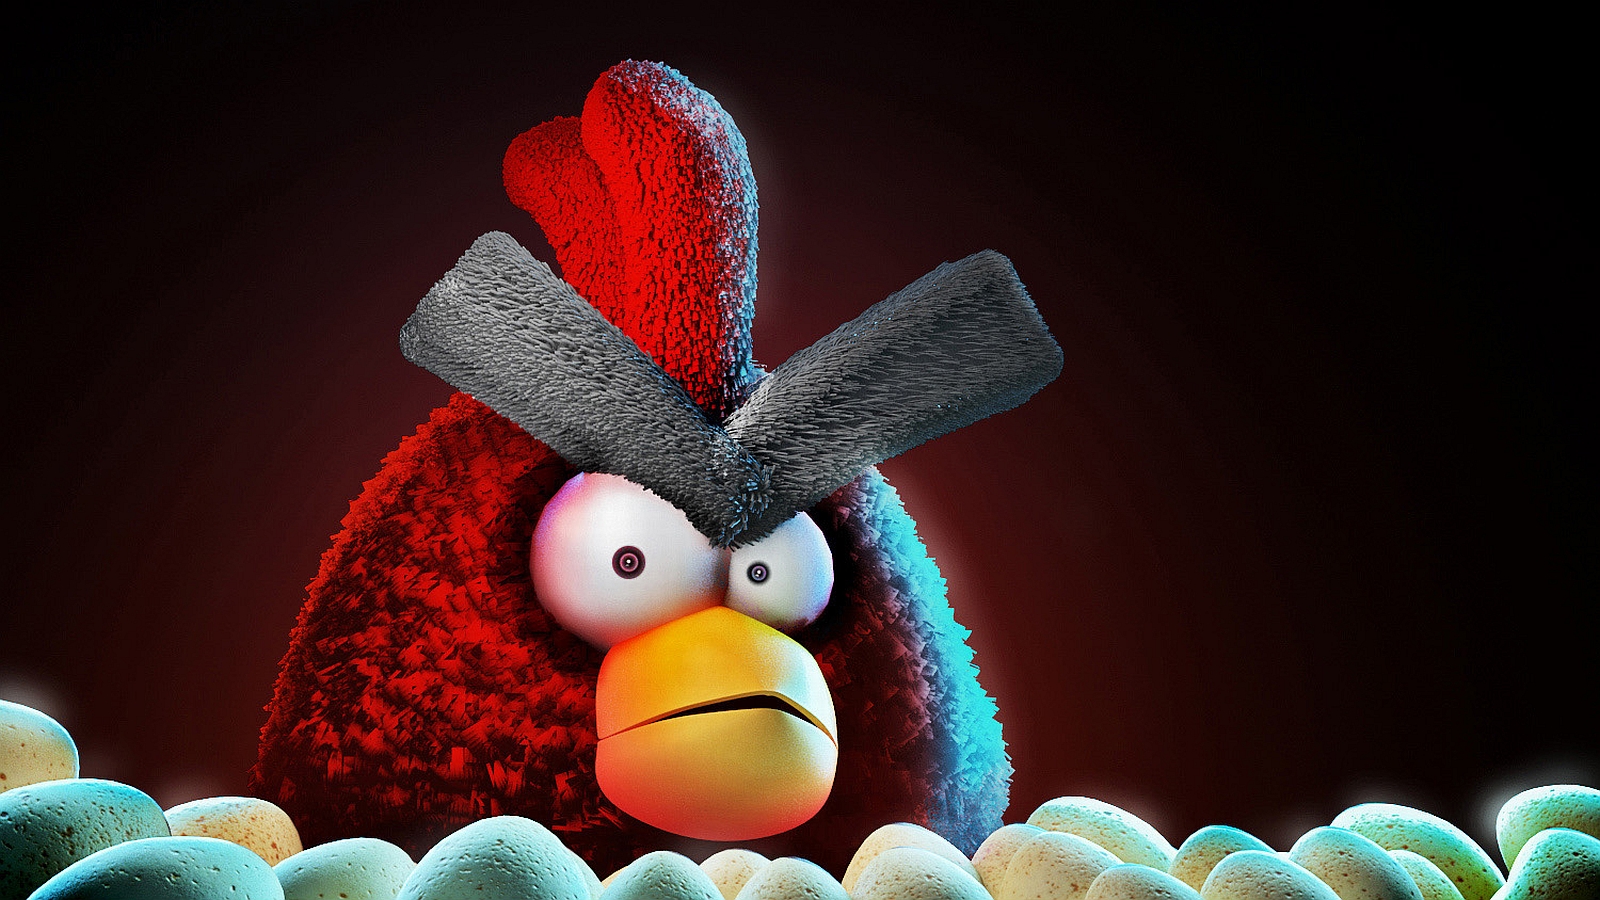 Angry Birds Wallpaper | 698+ Angry Birds 1080p, 2K, 4K, 8K, Wallpaper &  Background - [485+] Mood off DP, Images, Photos, Pics, Download (2023)